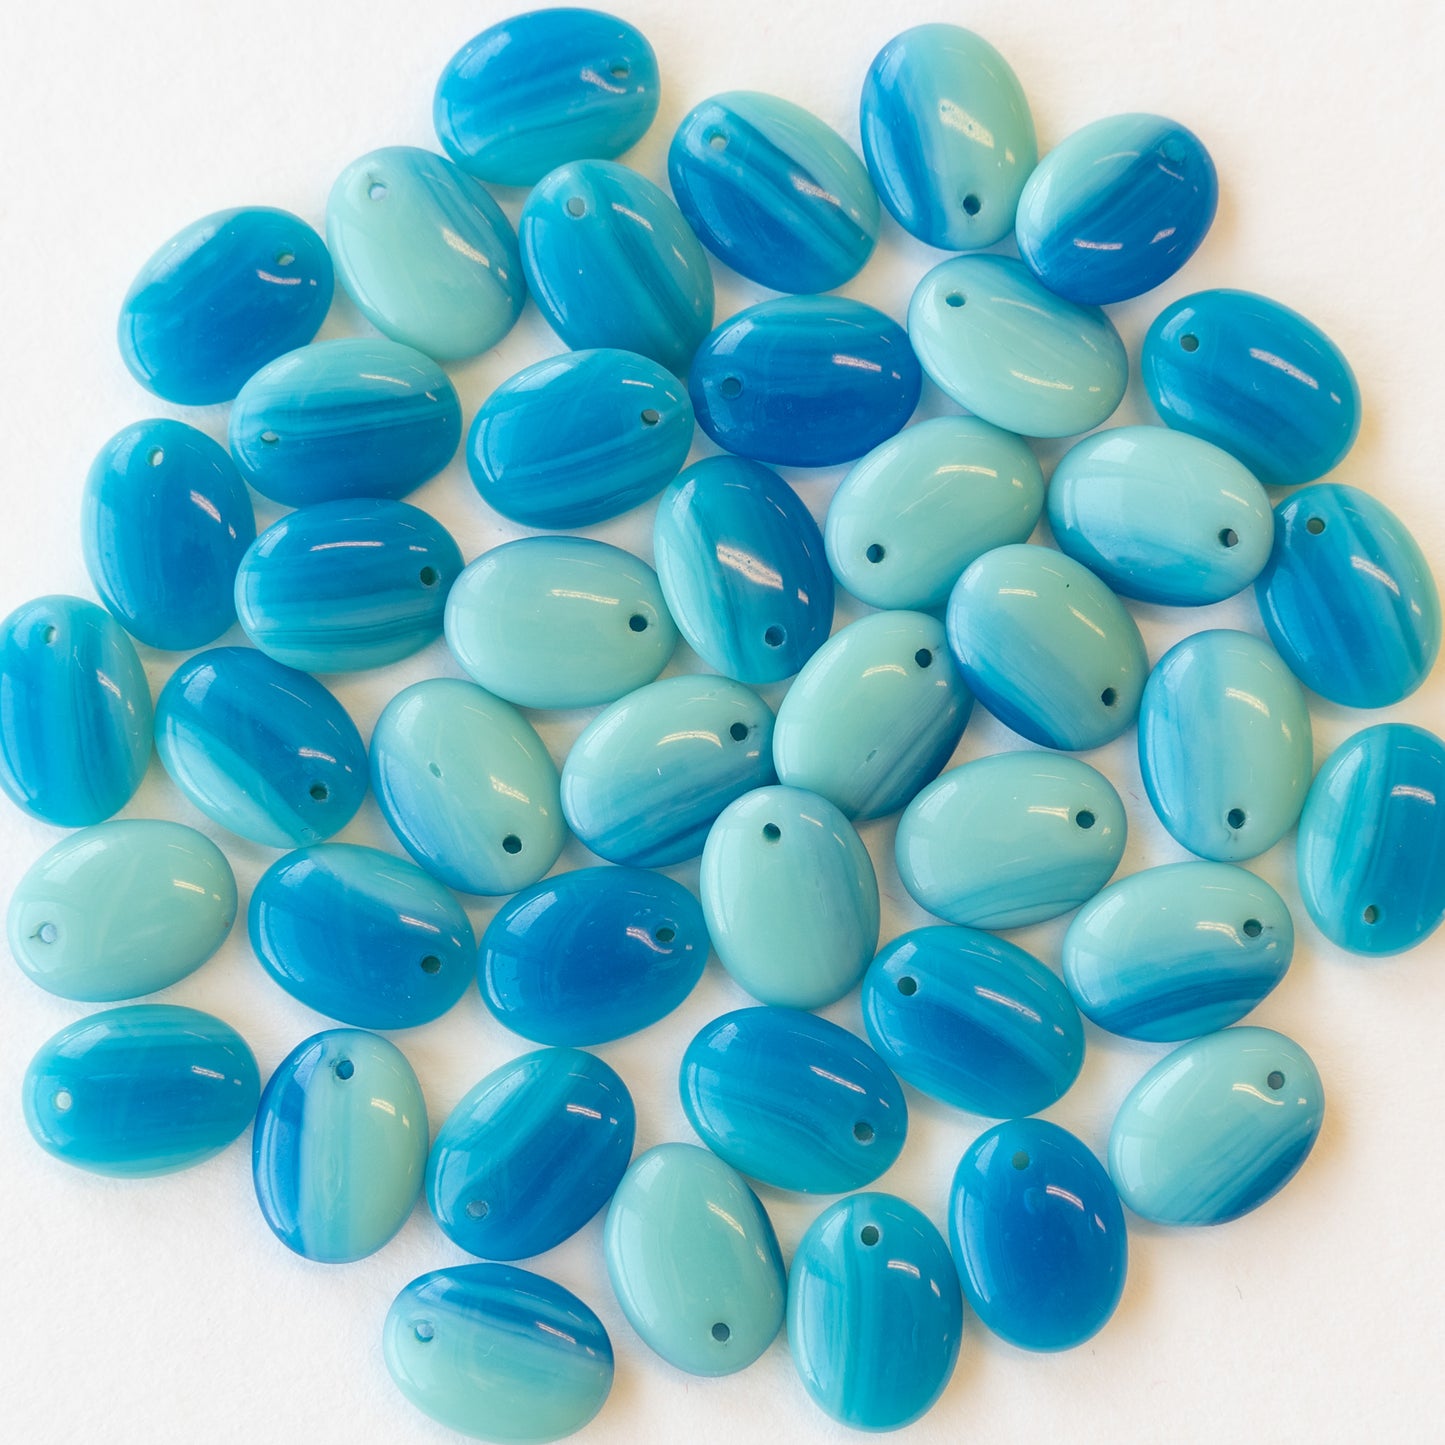 12mm Oval Lentil Beads - Turquoise Seafoam - 43 Beads